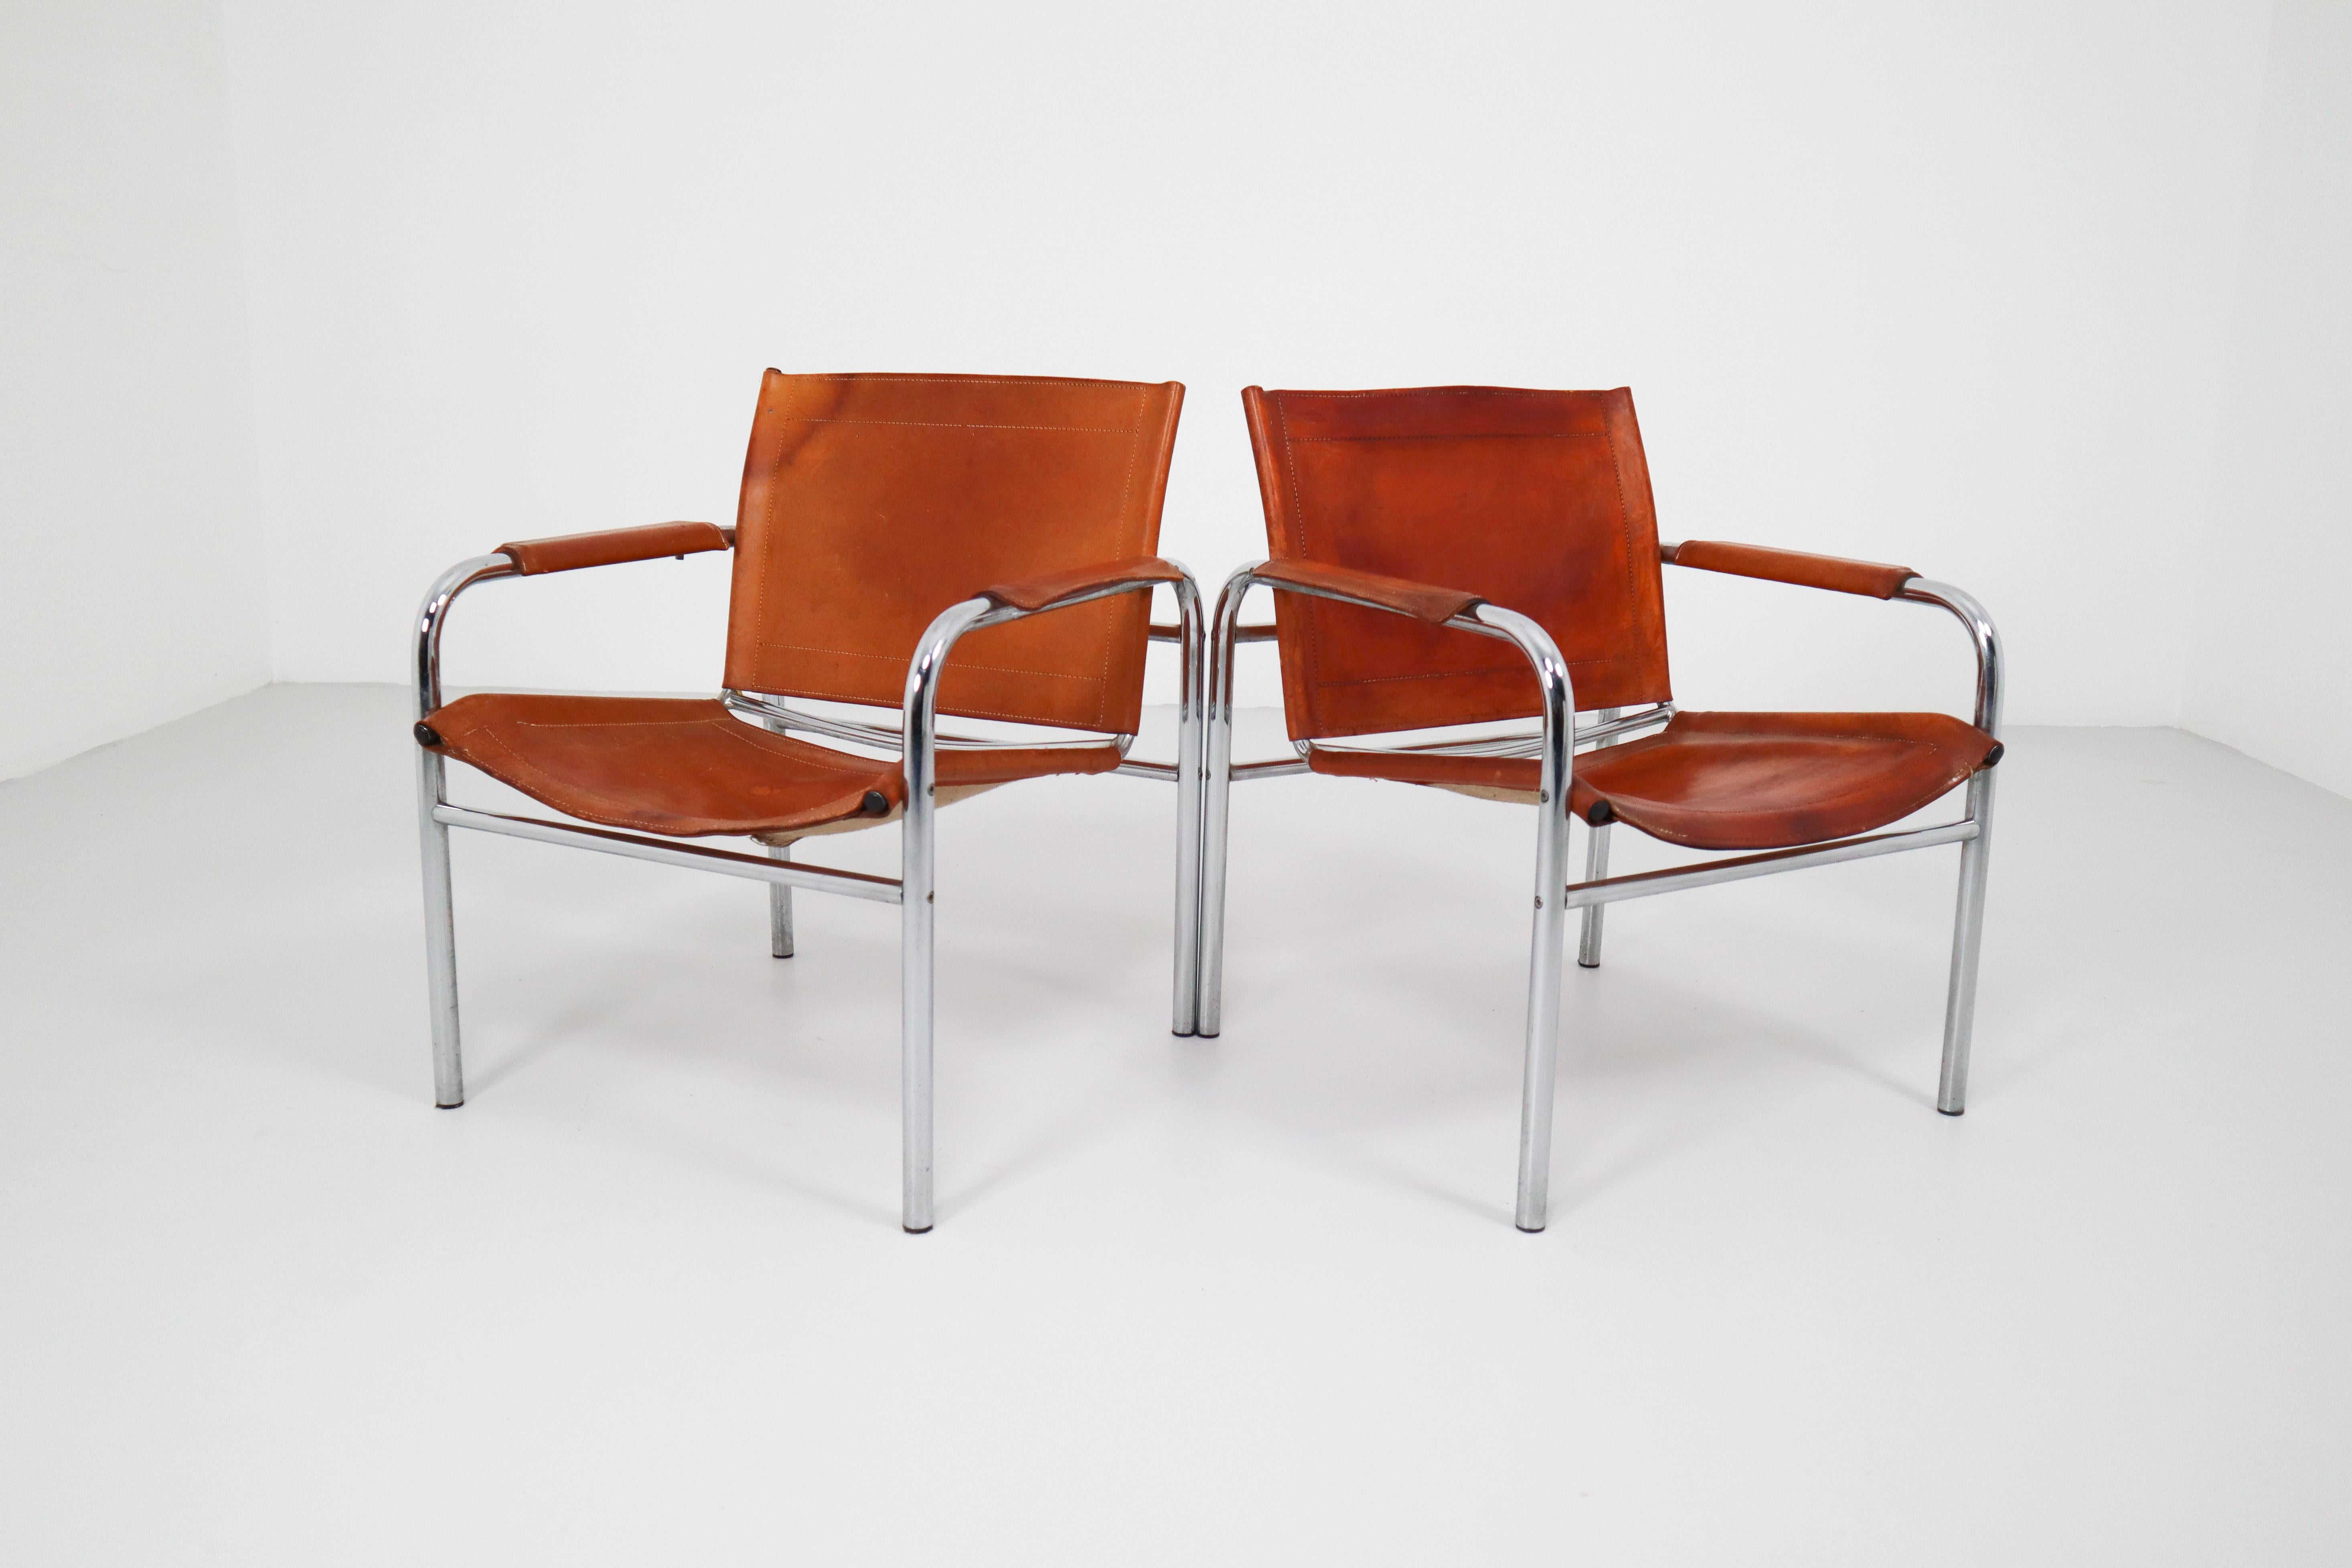 Set of two midcentury tubular chrome arm chairs with patinated cognac leather. An admirable patina is visible on the natural leather, which creates a vibrant surface and stunning color.
       